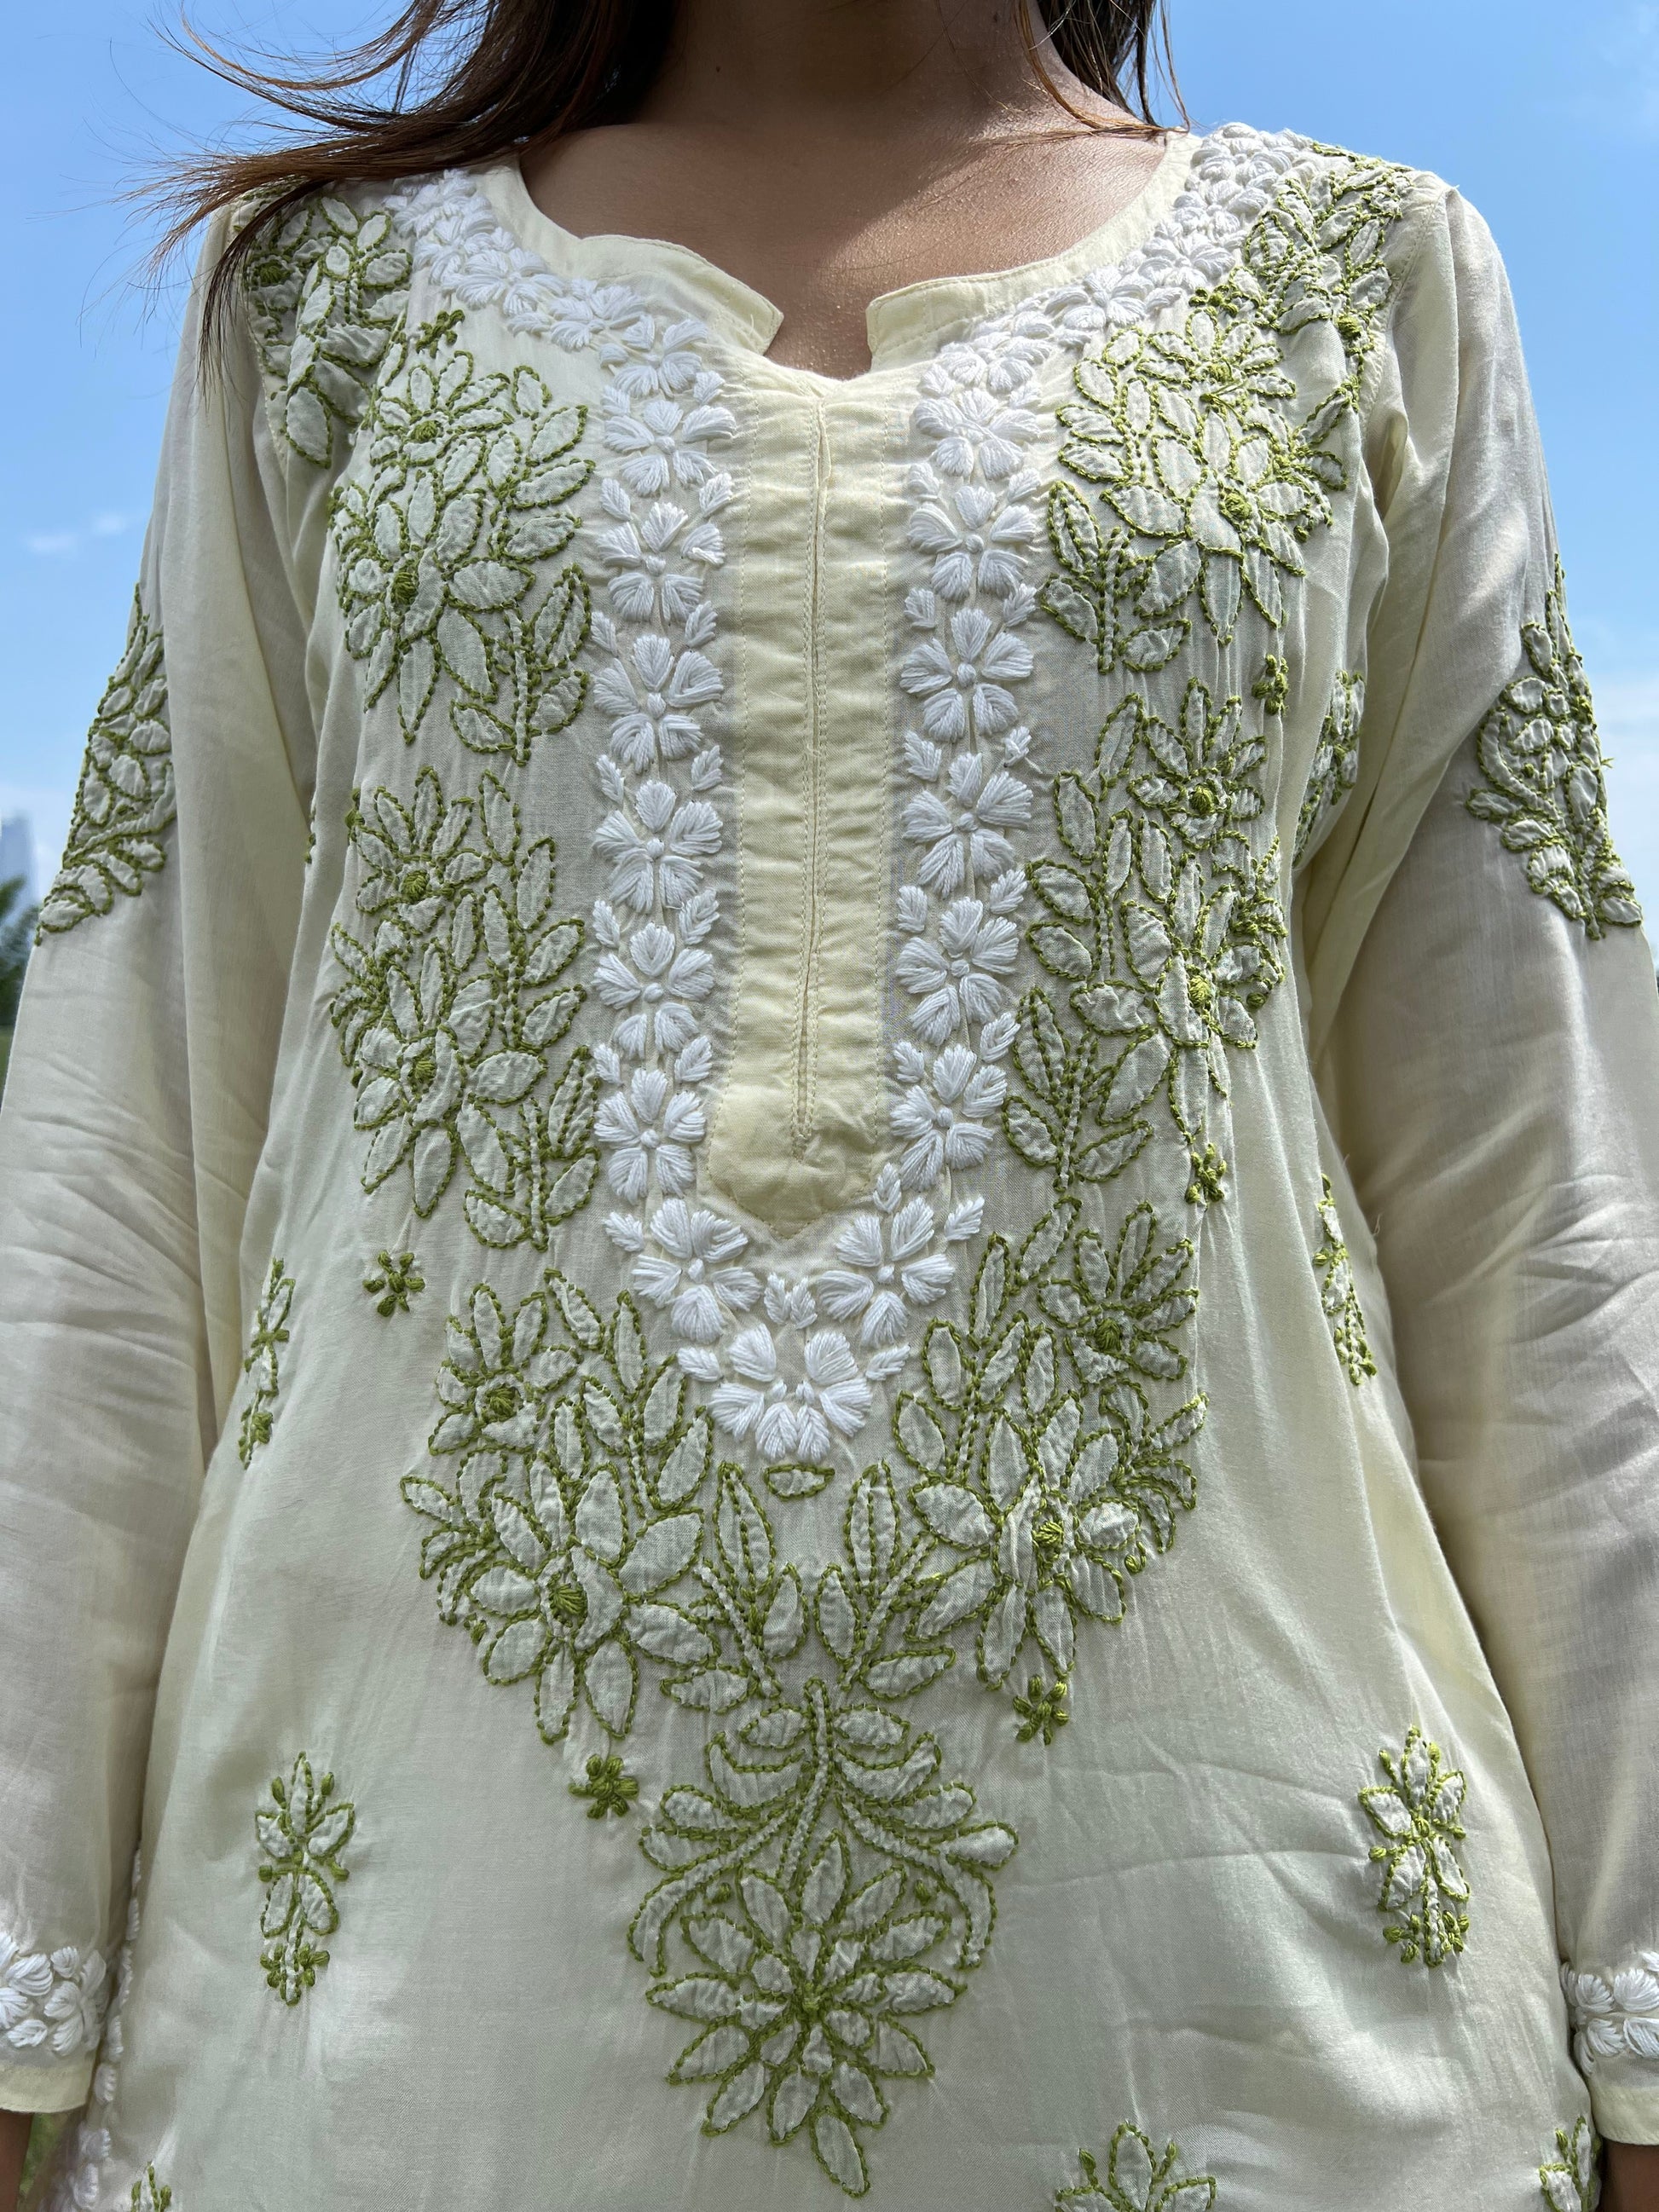 Chikankari floral border in white threads in neckline and floral booti  and bail in green threads all over the kurti